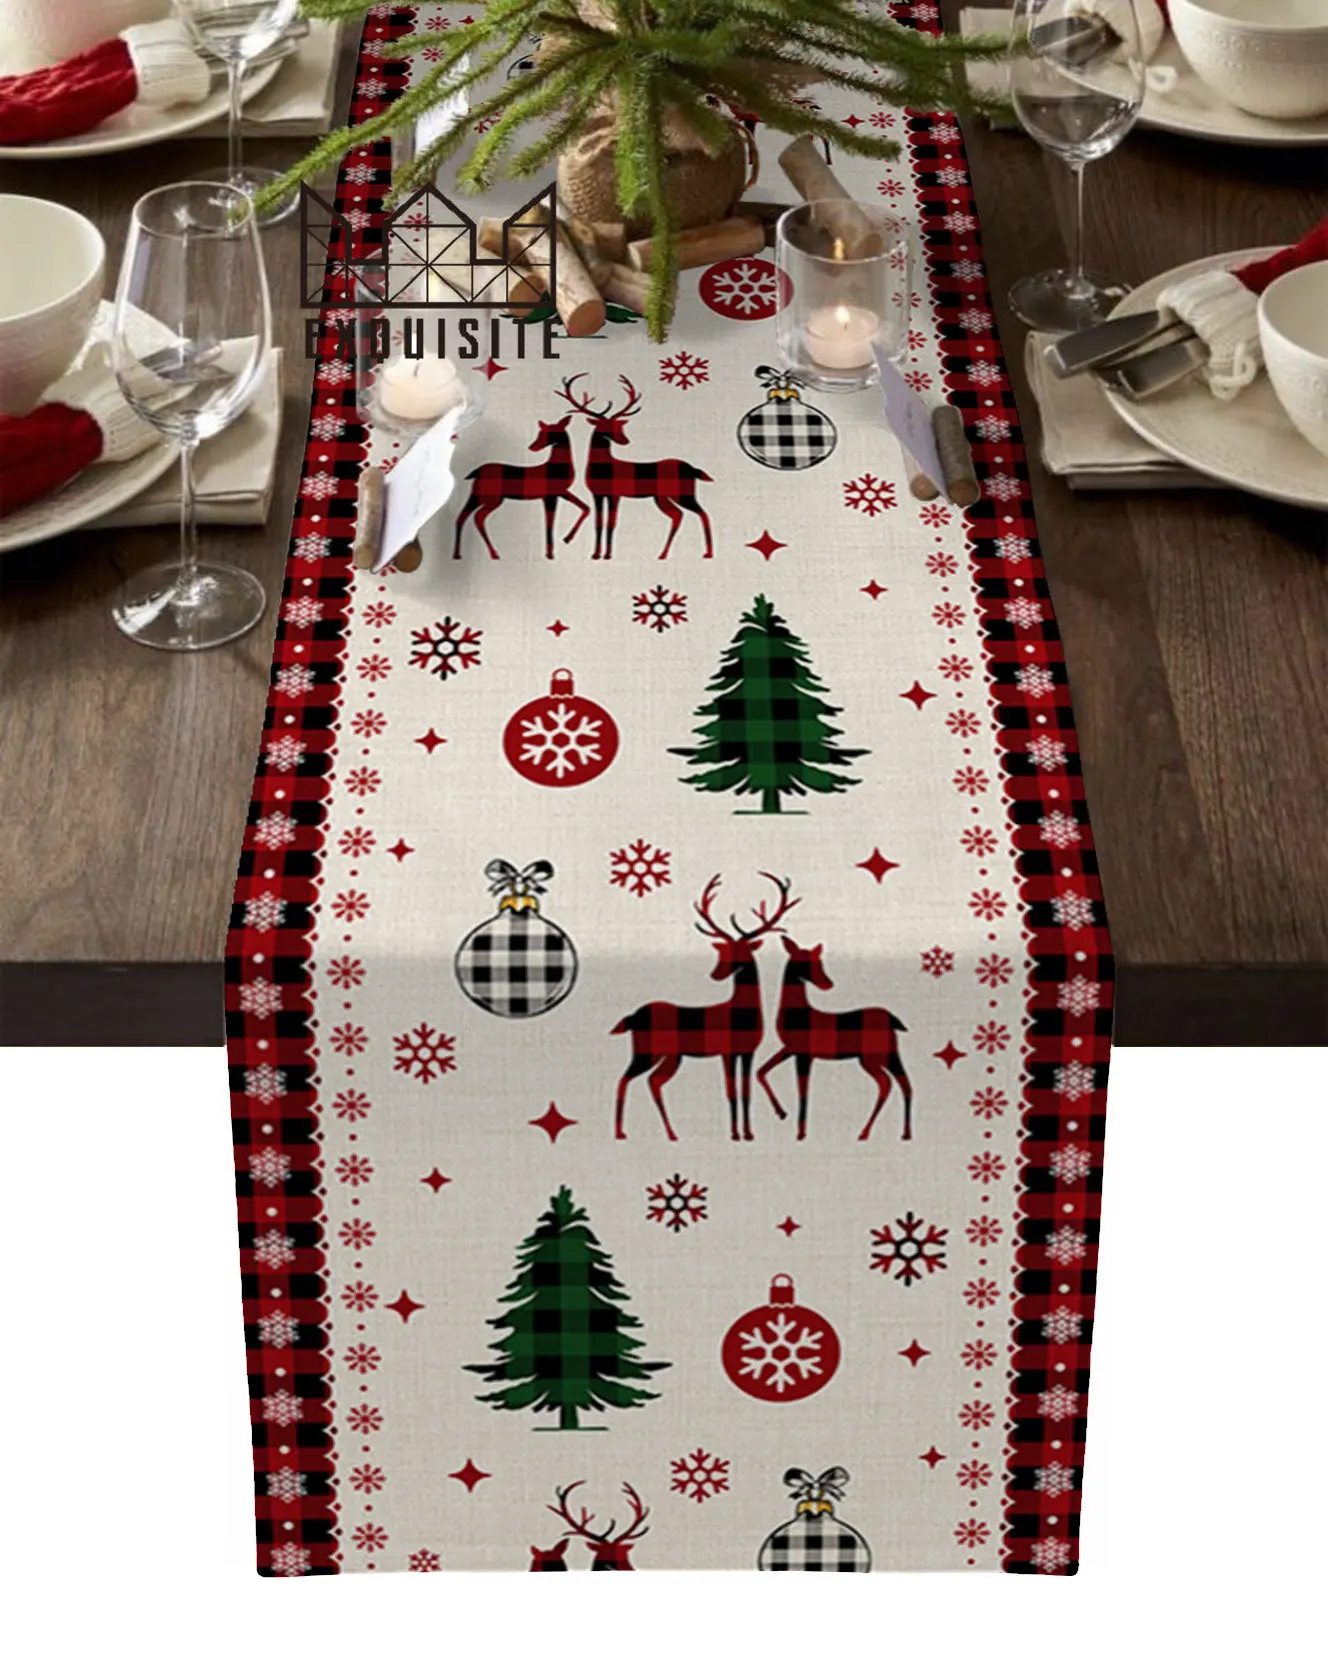 

Christmas Snowflake Elk Tree Christmas Home Decor Table Runner Wedding Decoration Tablecloth Kitchen Table Runners